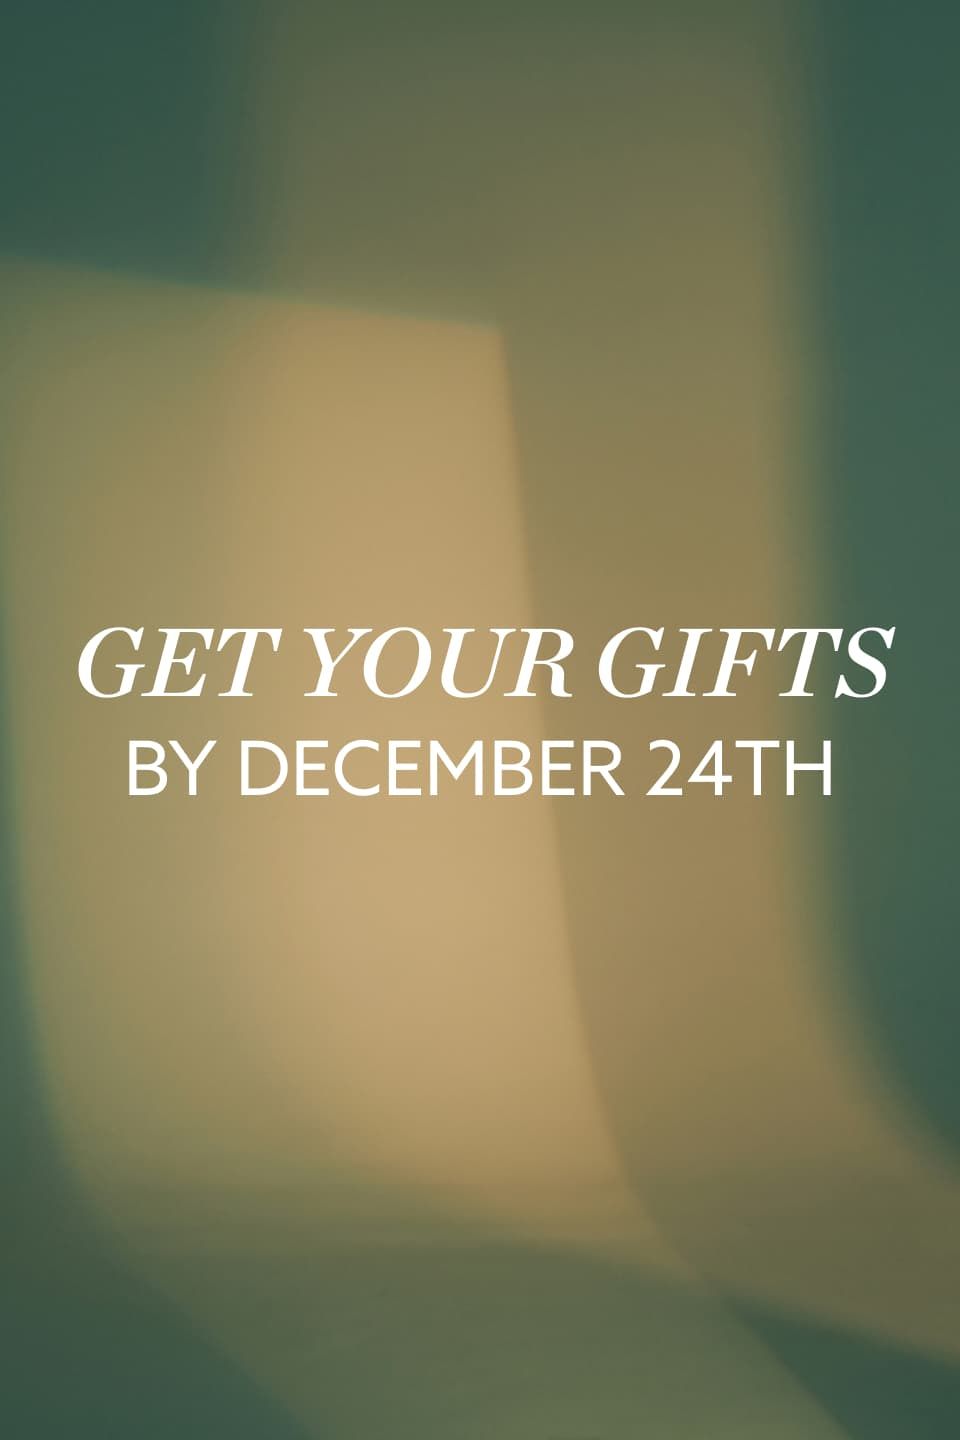 Get your gifts by December 24th